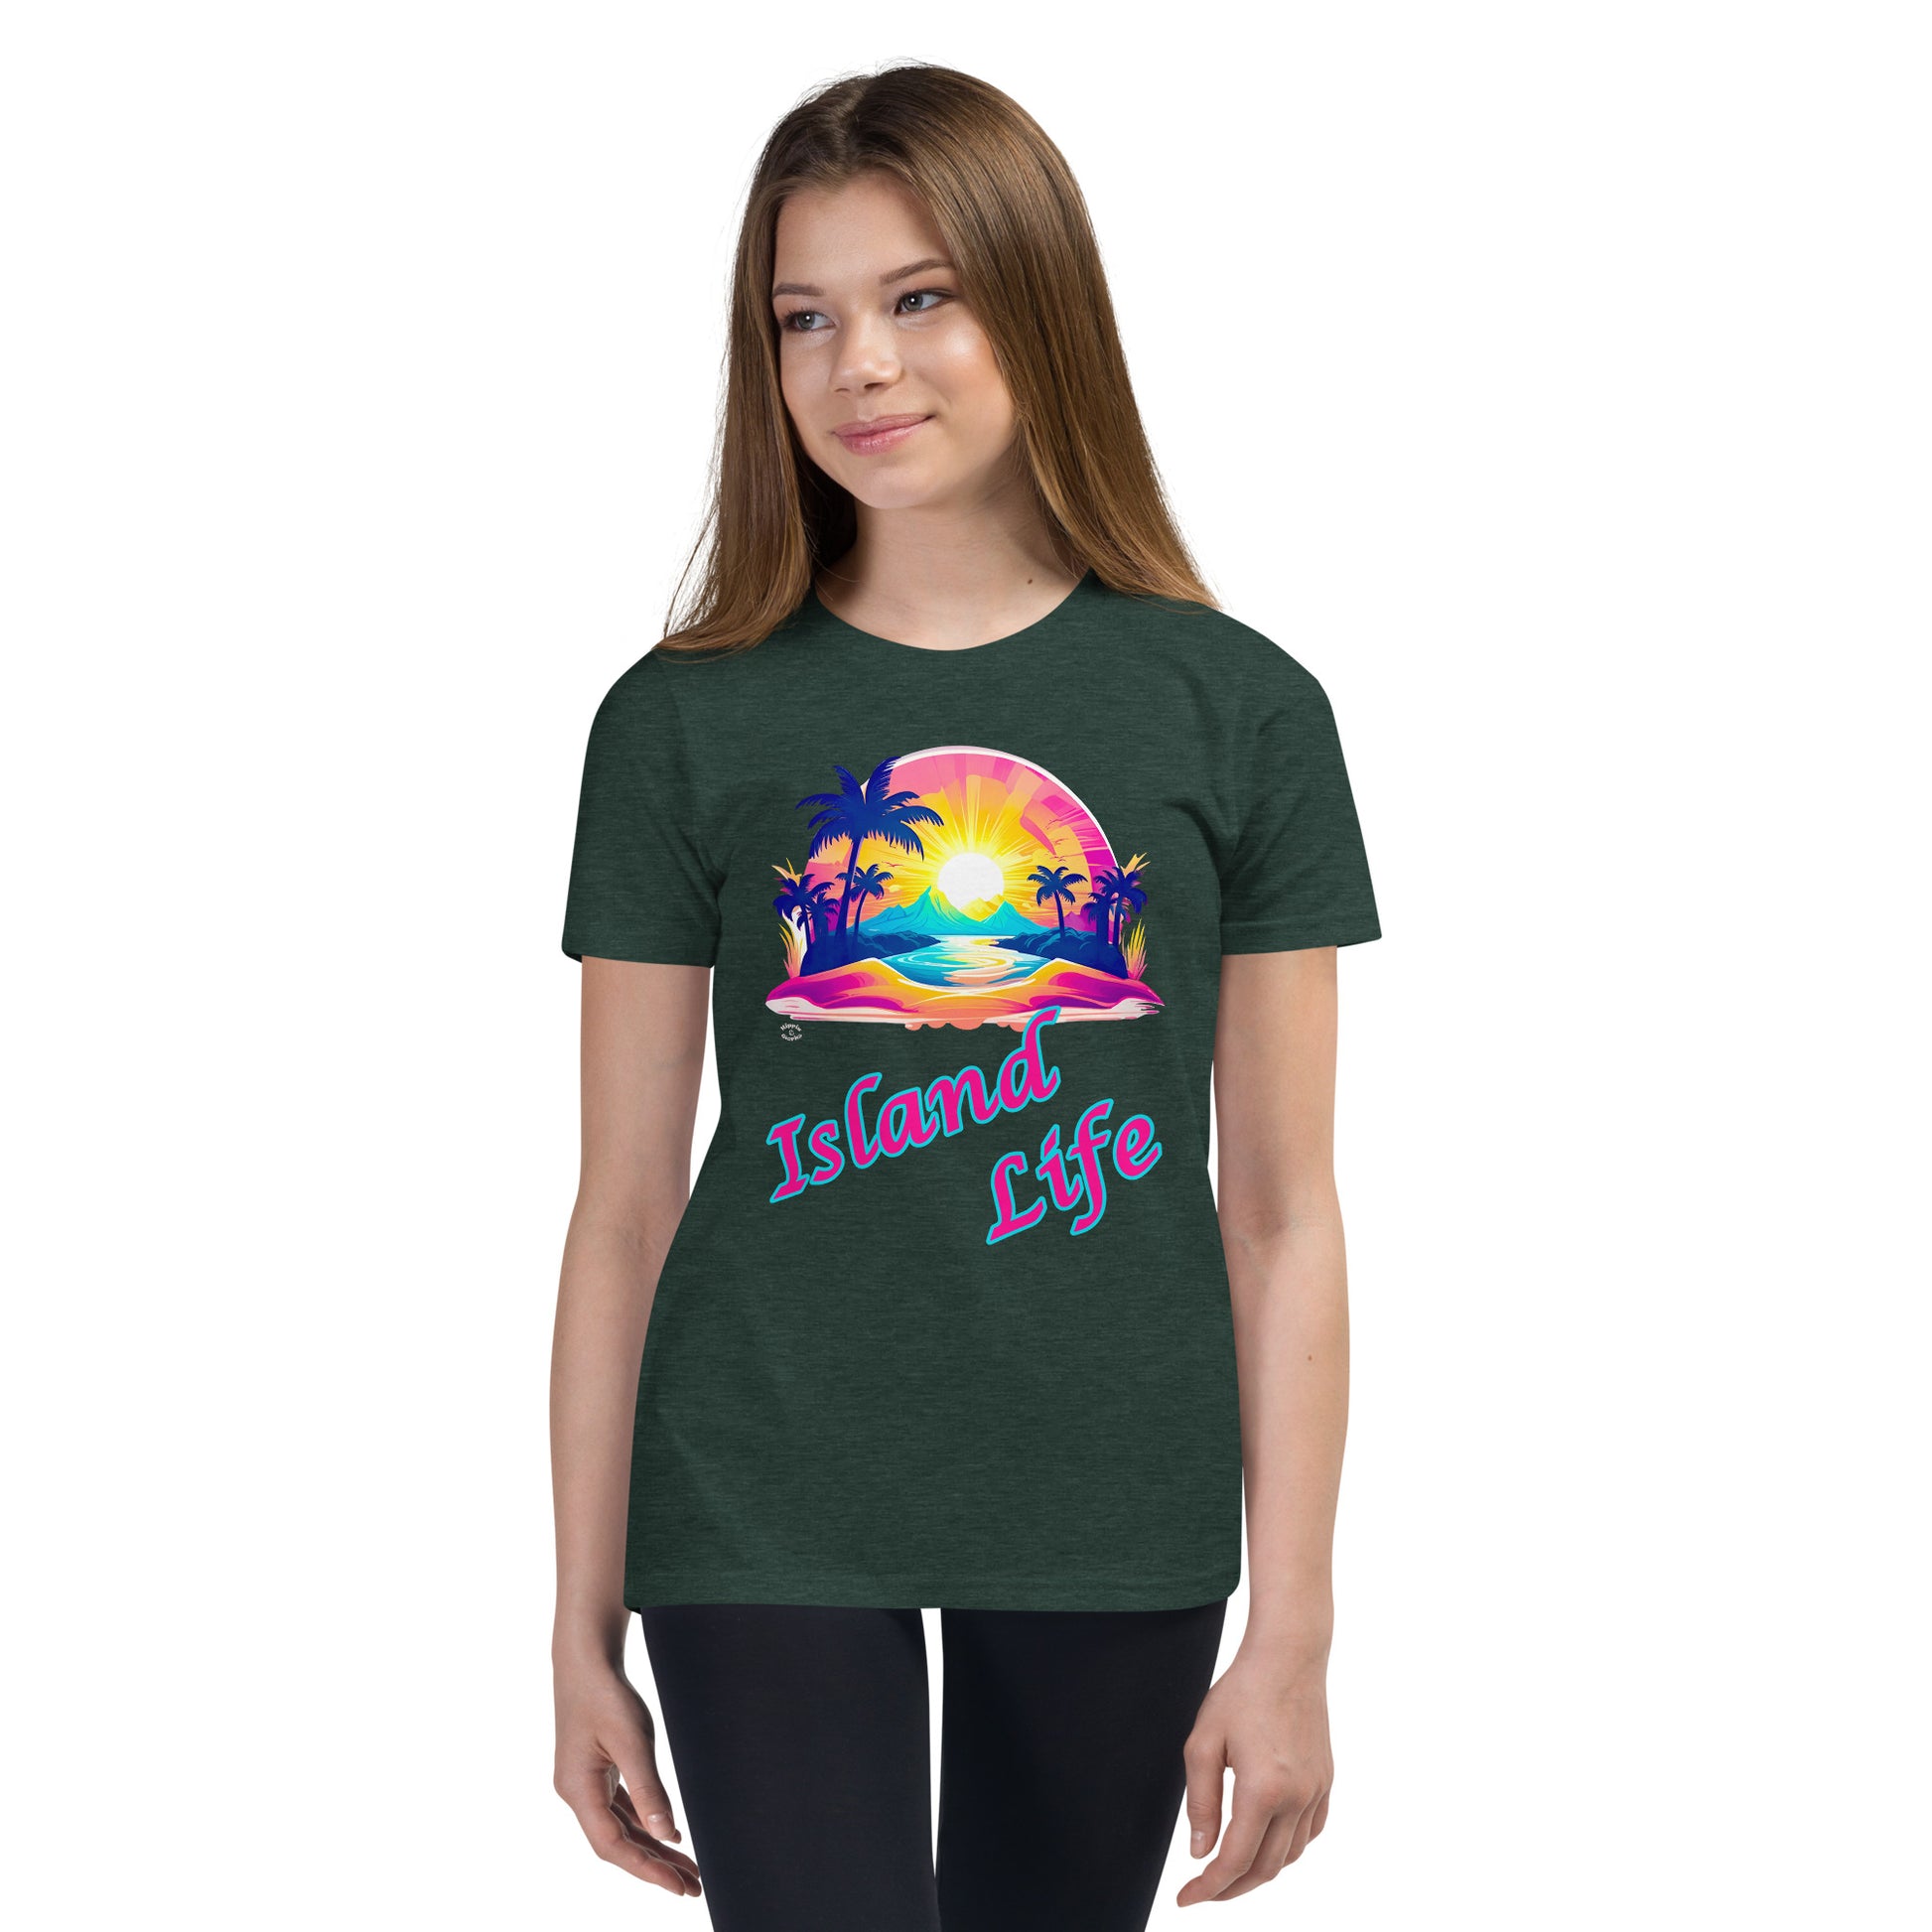 A picture of a girl modeling a tshirt that has a colorful picture of a tropical island paradise and underneath is the text Island Life - forest heather green